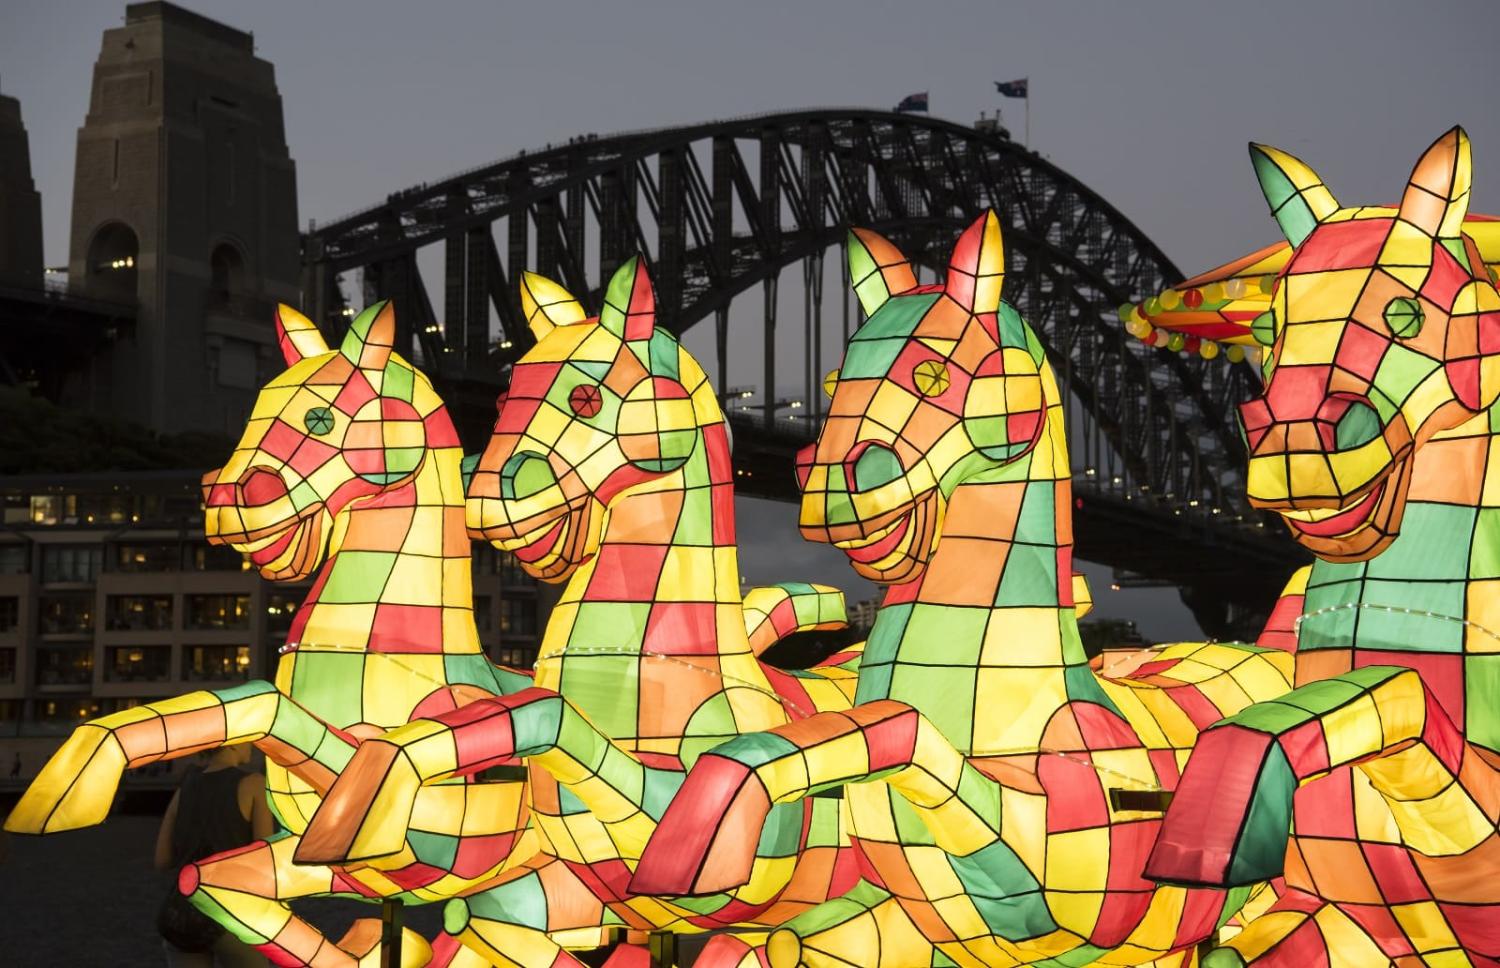 Celebrations for the Lunar New Year in Sydney (James D Morgan/Getty Images)